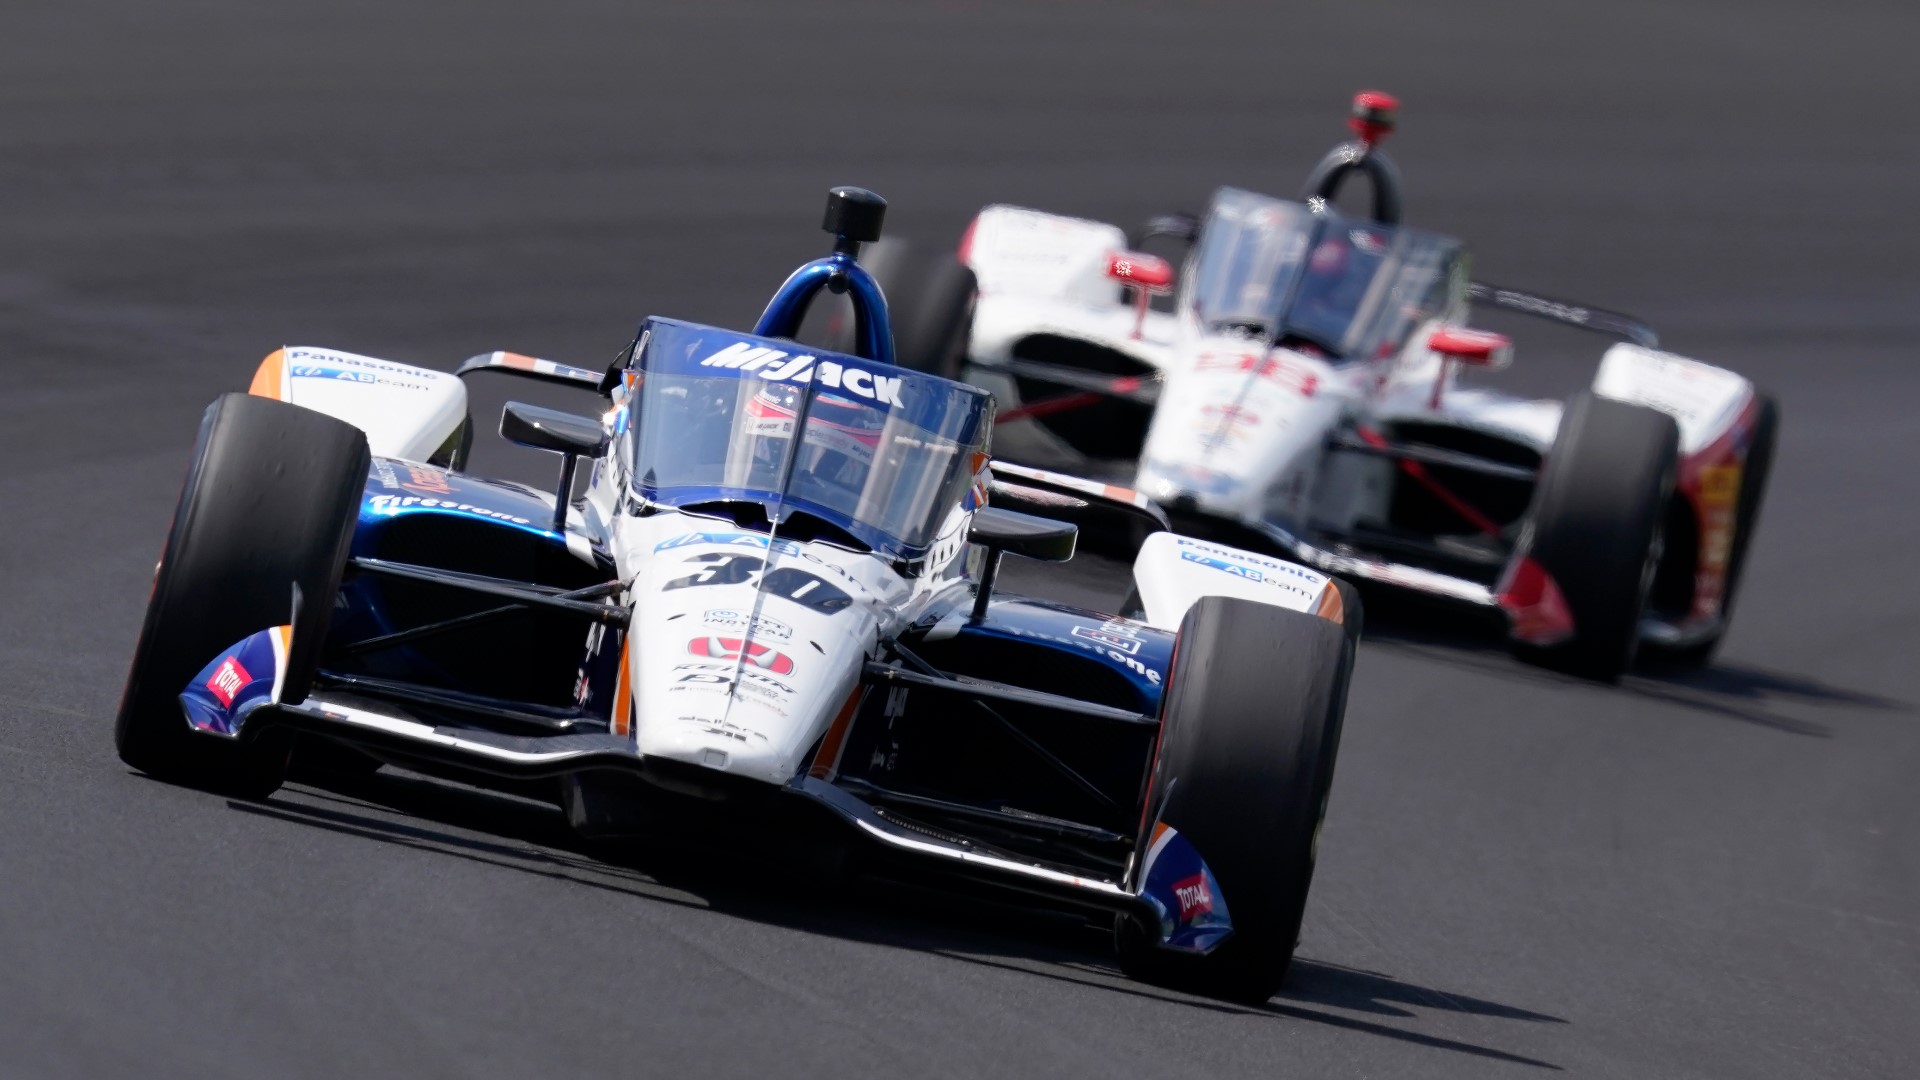 IMS has been approved to open the Indy 500 at 40% of its seating capacity, meaning about 135,000 fans will be able to attend this year's race.